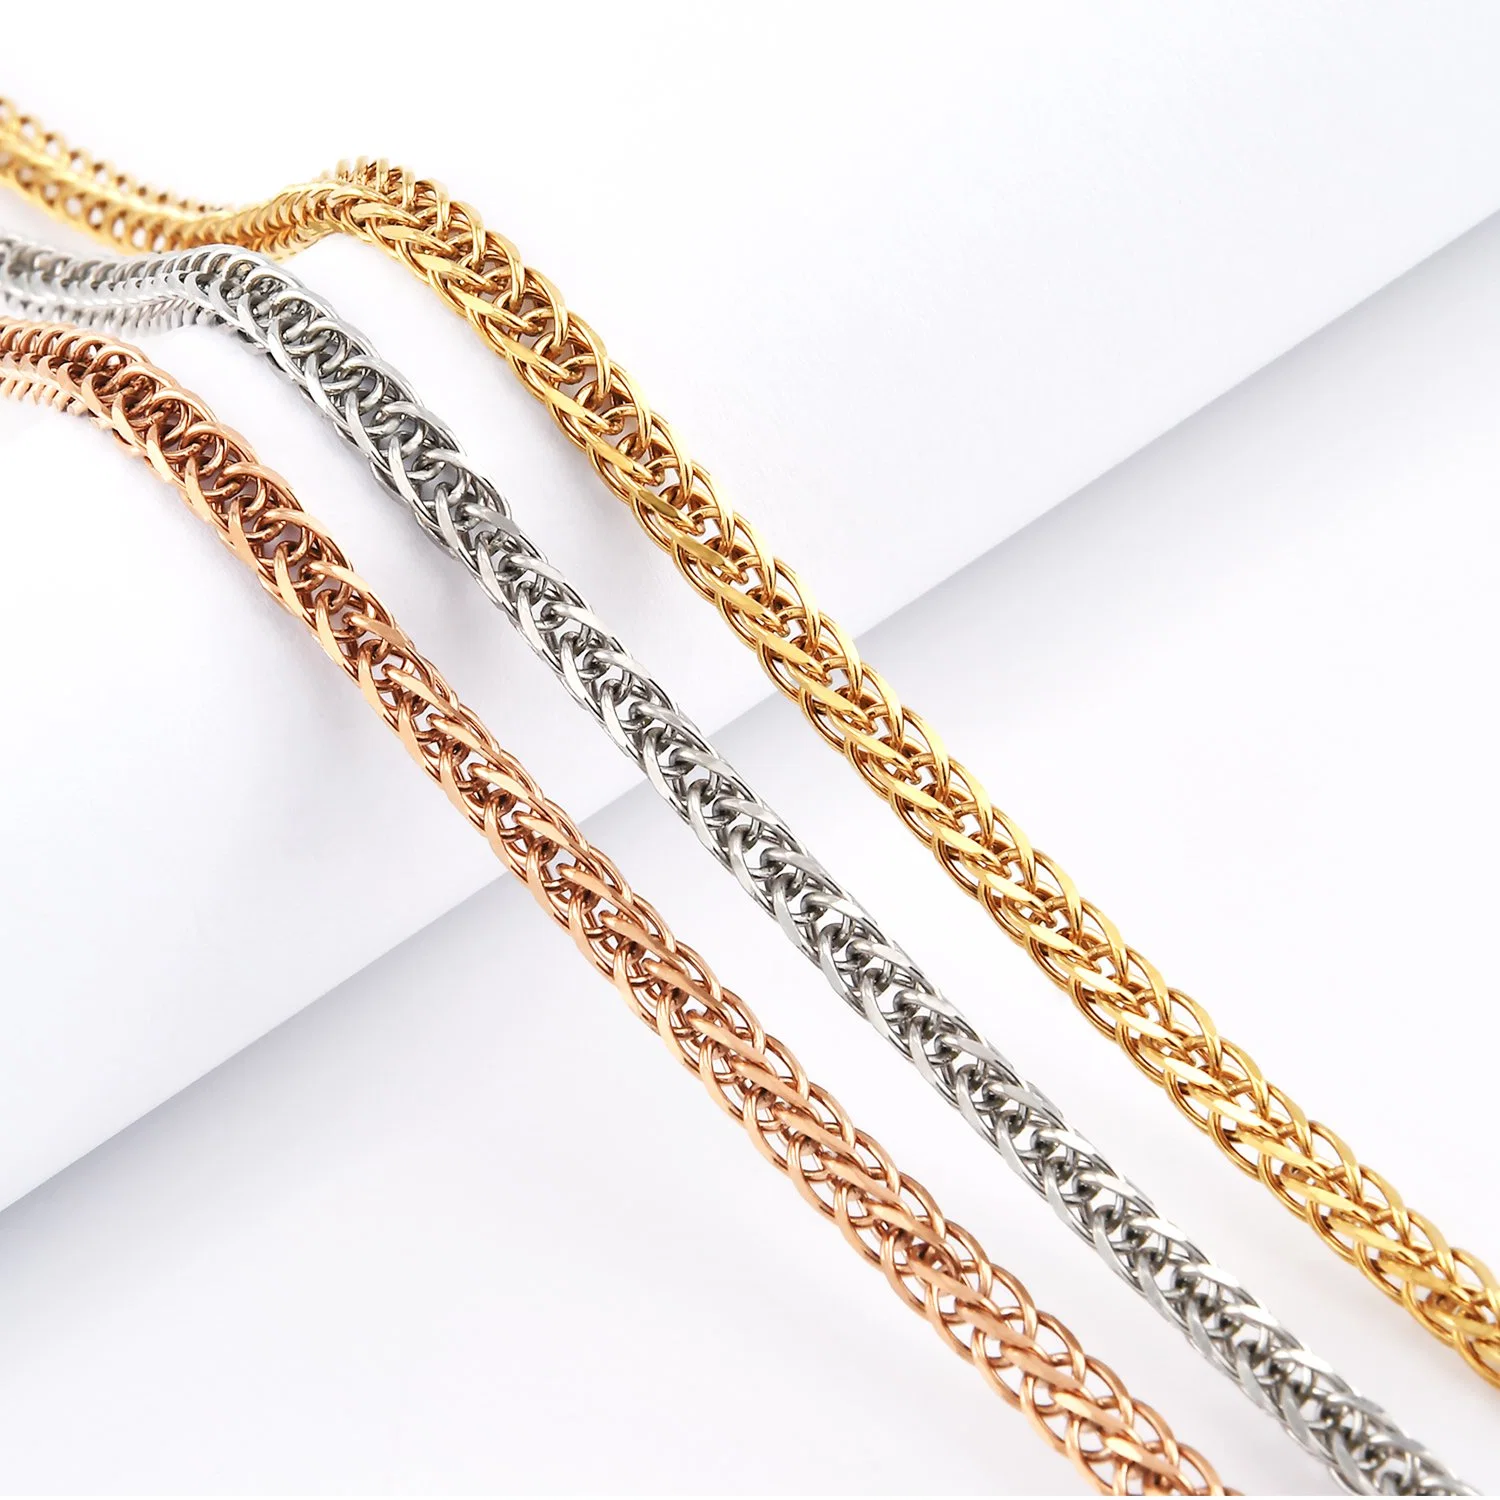 Hot Sale Chopin Chain Necklace Bangle Jewelry Fashion Craft Design Stainless Steel Gold Plated for Fashion Accessories